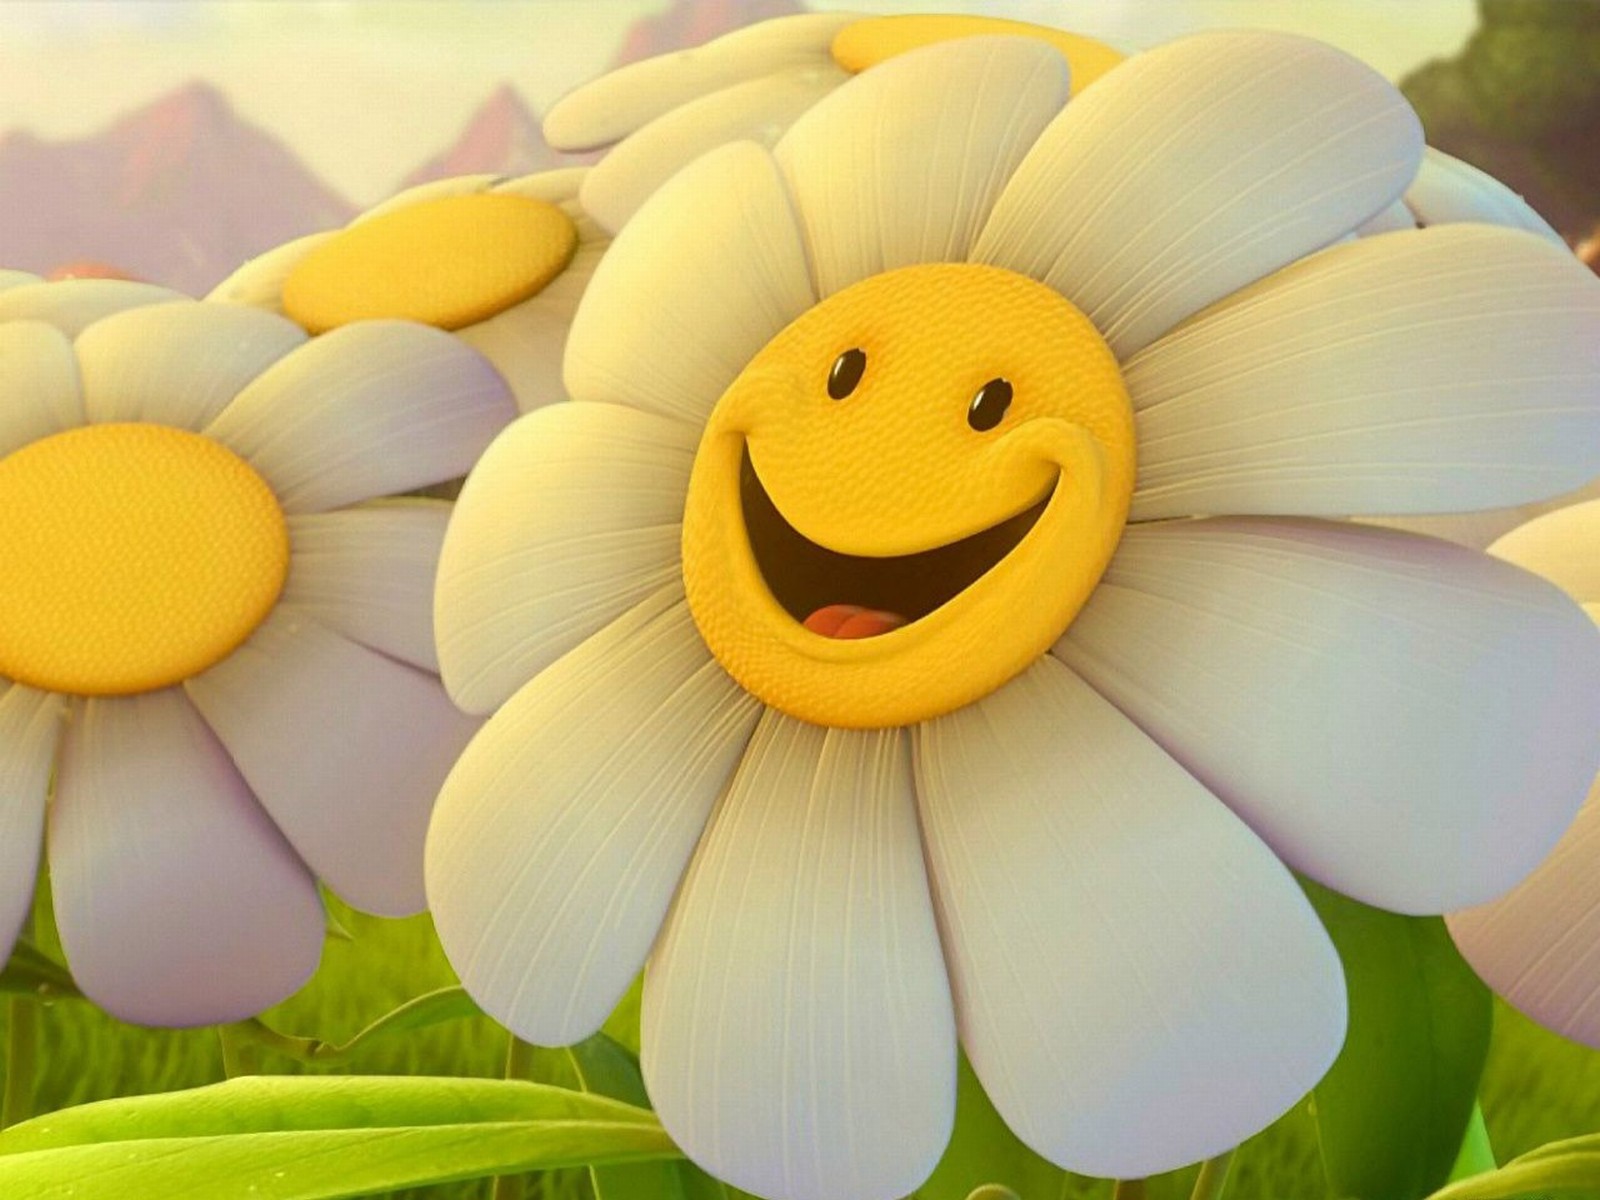 Happy Flowers Images Wallpapers